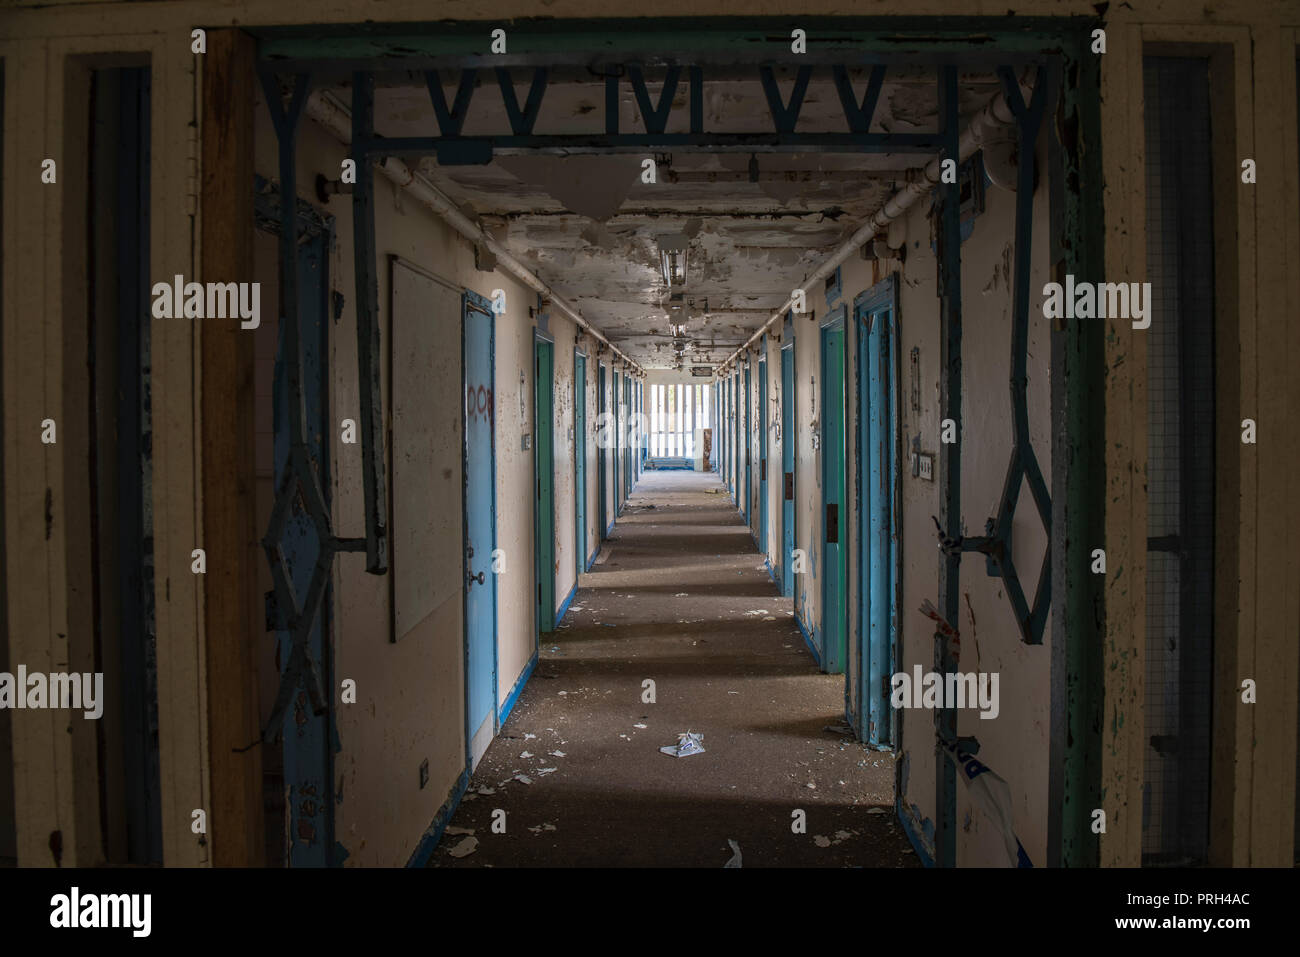 Corridor of prison cell doors inside an abandoned prison. Stock Photo